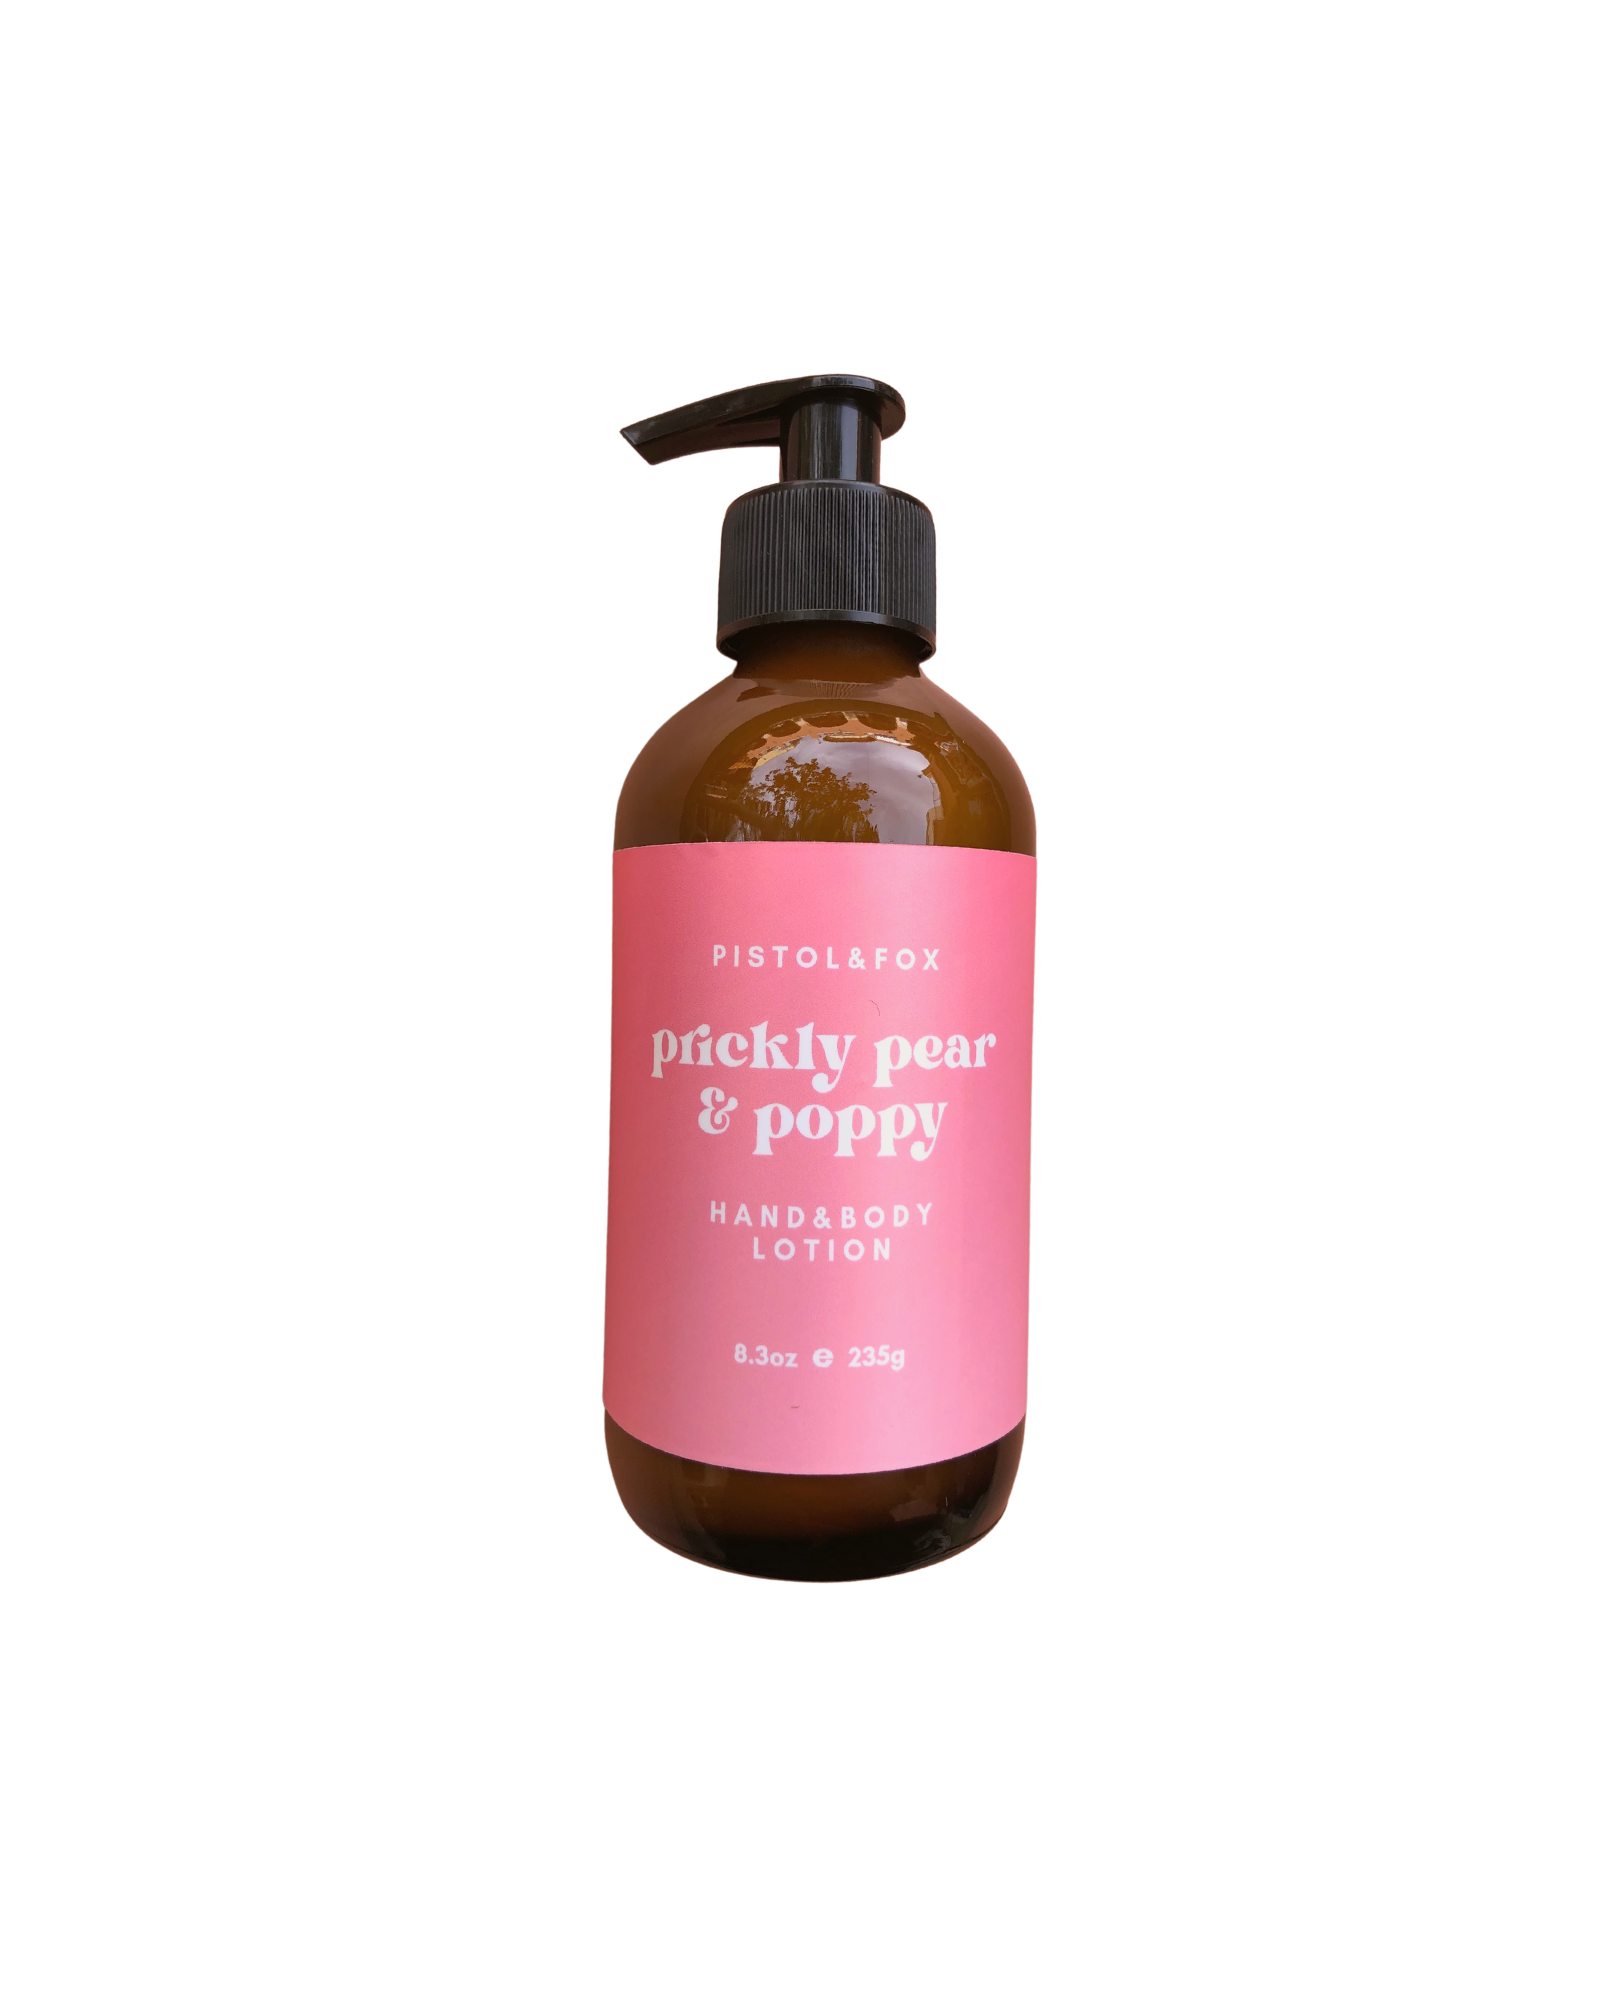 Amber lotion bottle with black pump top, pink label that reads "pistol & fox prickly pear & poppy hand and body lotion"